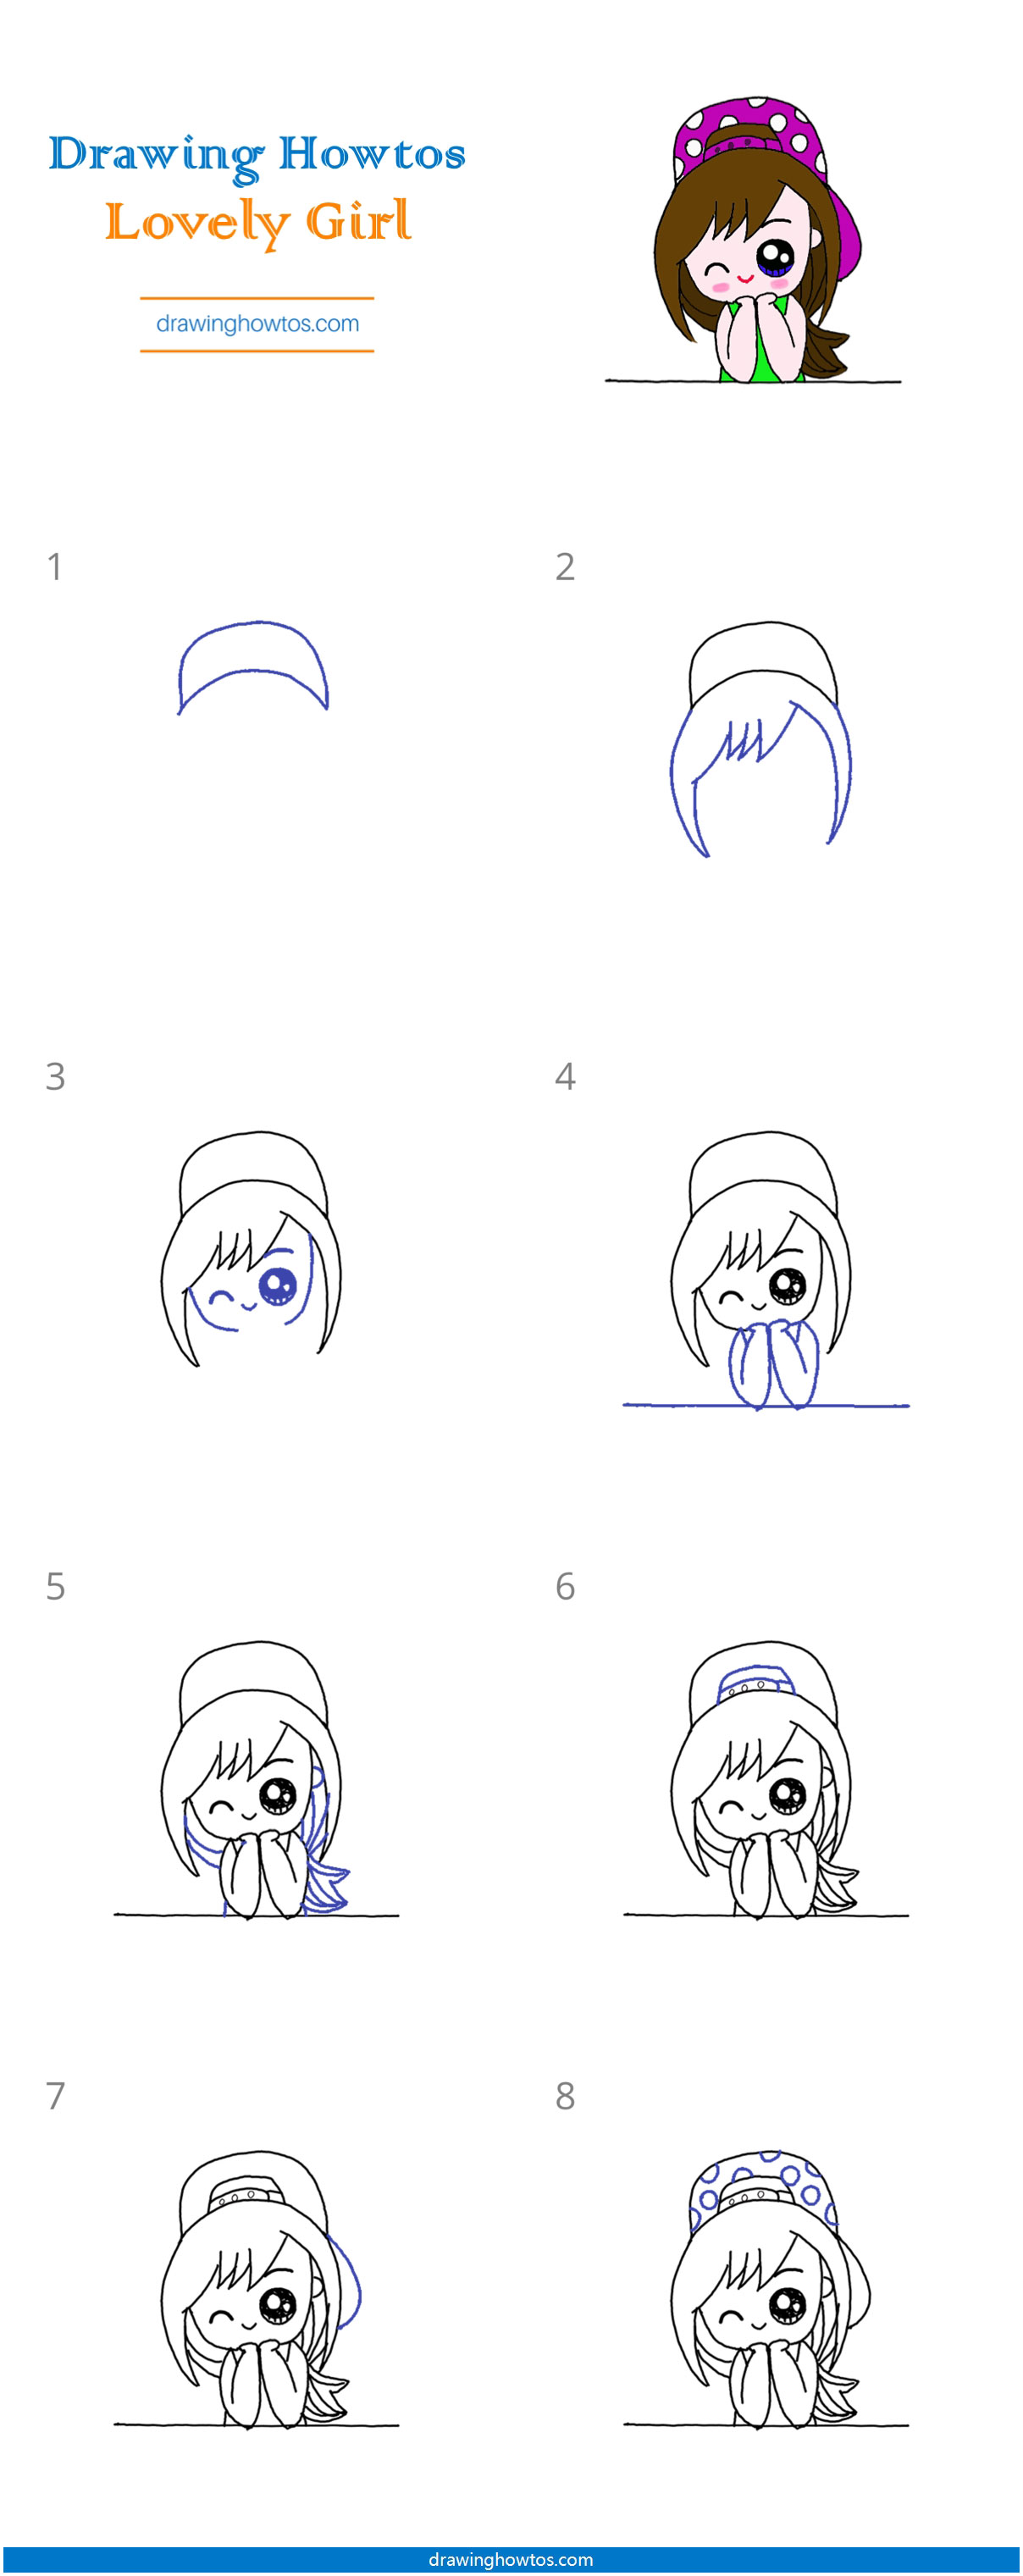 How to Draw a Lovely Girl Step by Step